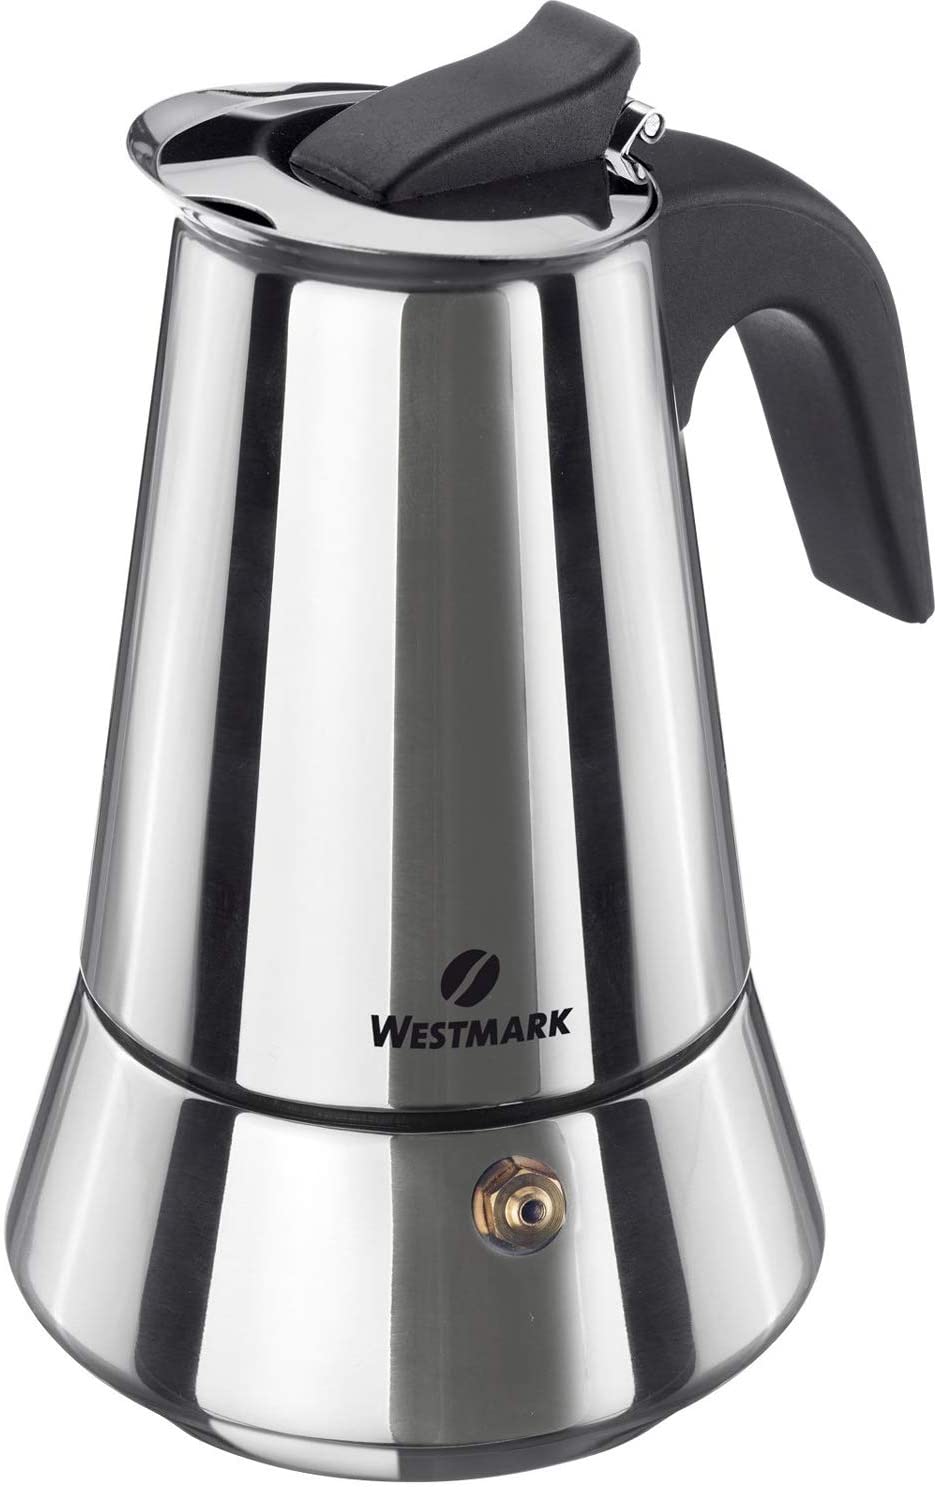 Westmark Brasilia Plus 24662260 Espresso Maker for 4 Cups Espresso Suitable for Induction Cookers Stainless Steel